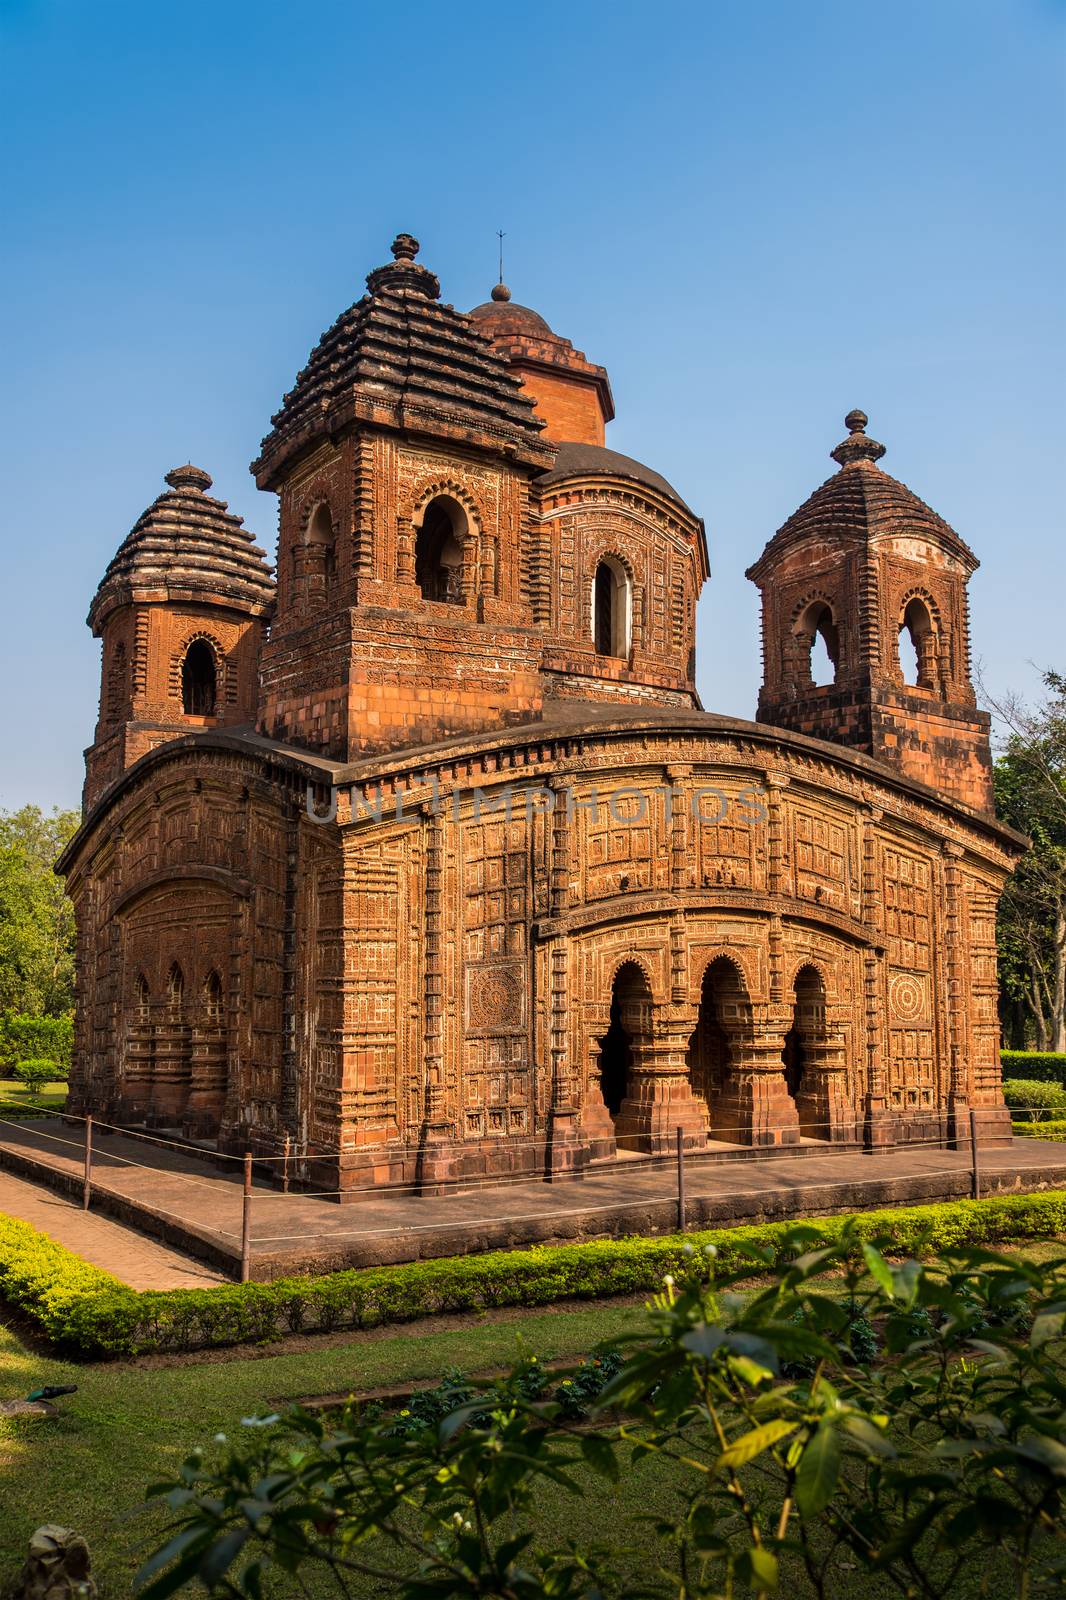 The historically famous Shyam Rai temple also known as Pancha Ratna Temple in Bishnupur established in 1643 AD